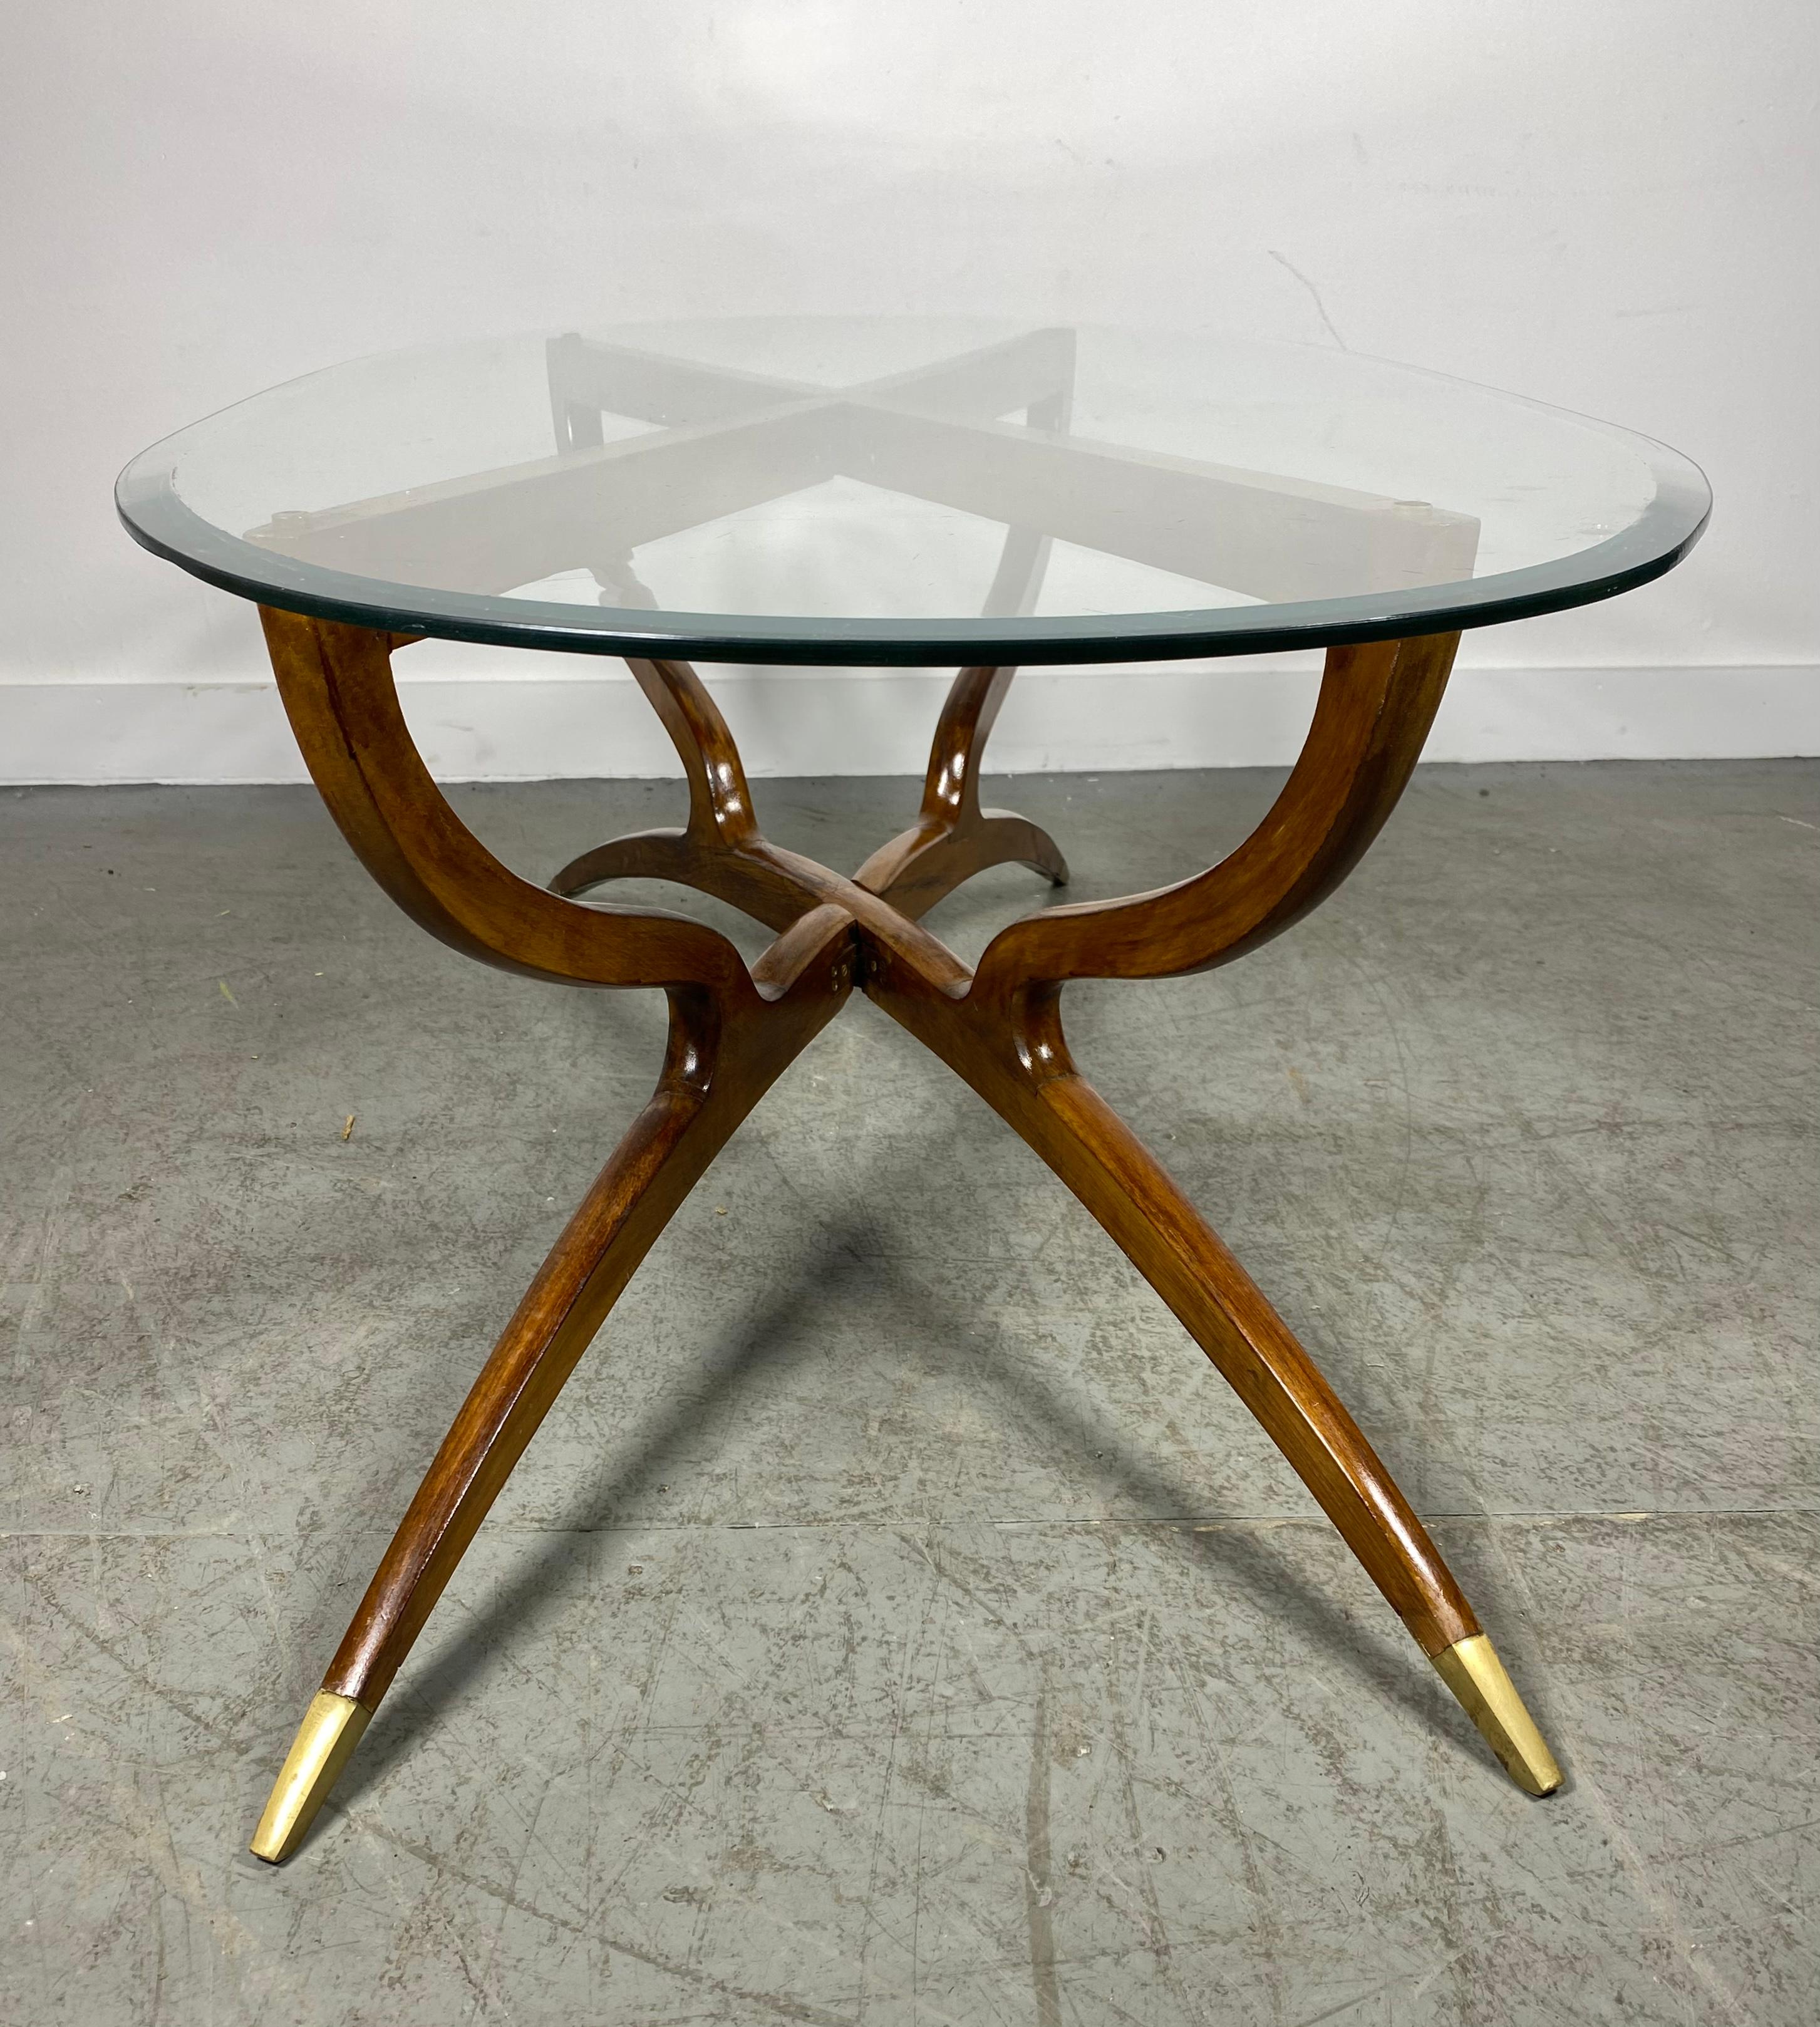 Kagan Style Modernist Spider Leg Coffee / Cocktail Table In Good Condition For Sale In Buffalo, NY